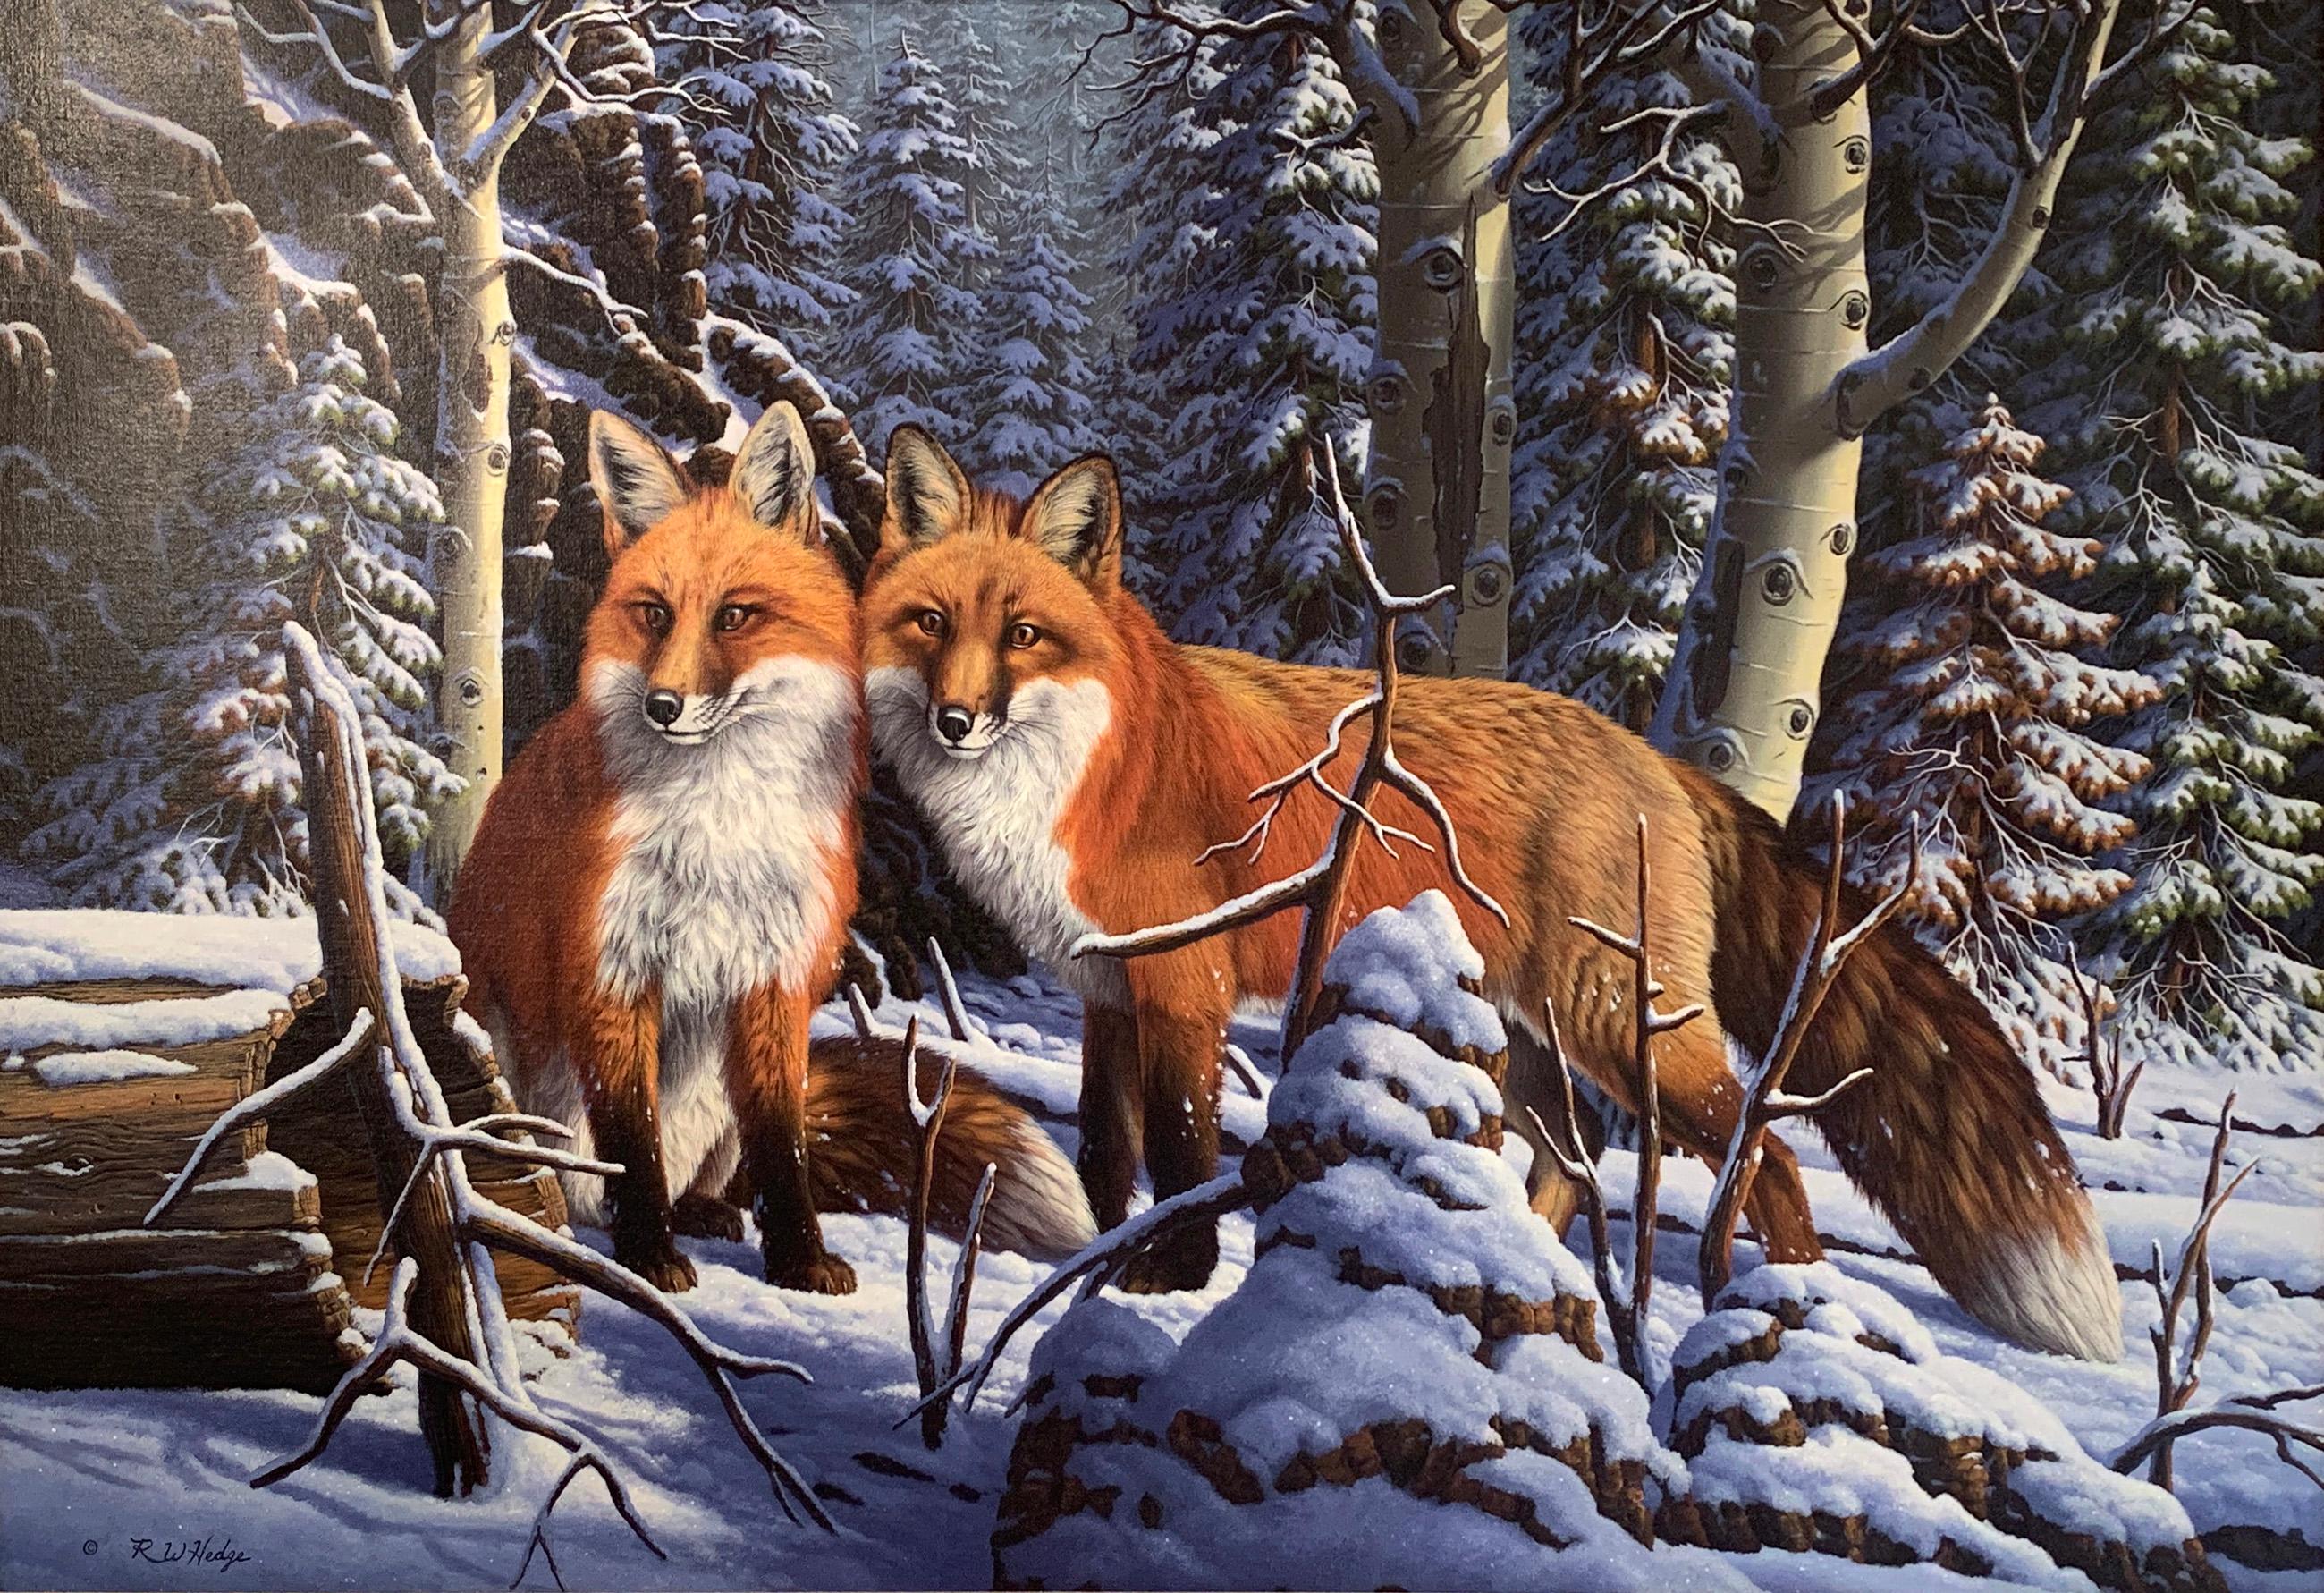 R. W. Hedge Landscape Painting - "Touch of Red", R.W. Hedge, Original Oil on Canvas, 31x50 in, Red Fox, Landscape